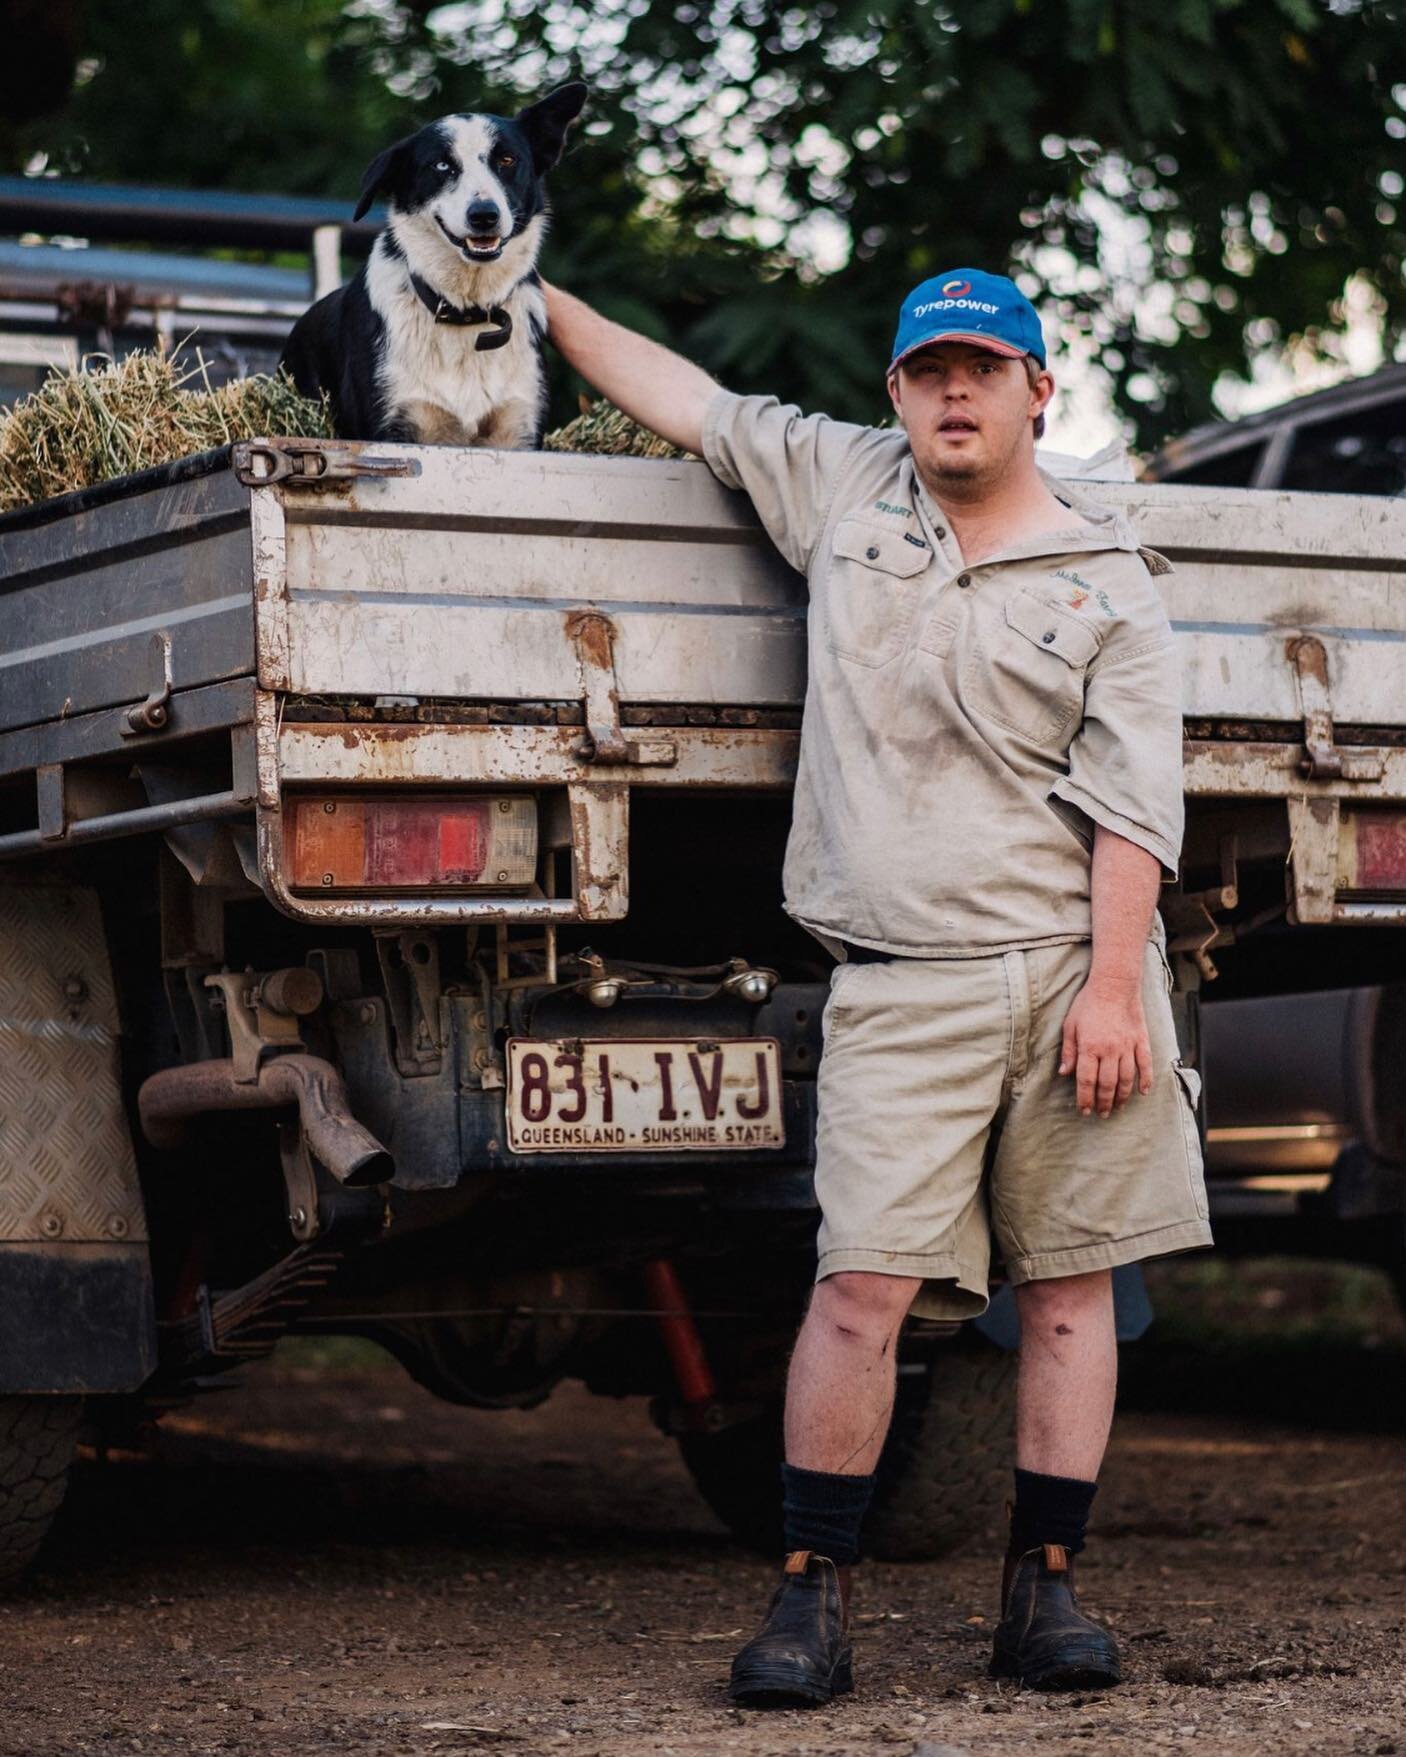 Stuart McInnes with his dog Peter outside the family dairy near Monto in central Queensland. Stuart works on the farm alongside three or four border collies, a breed the family loves because of their intelligence and wonderful nature.

@jessica_j_how